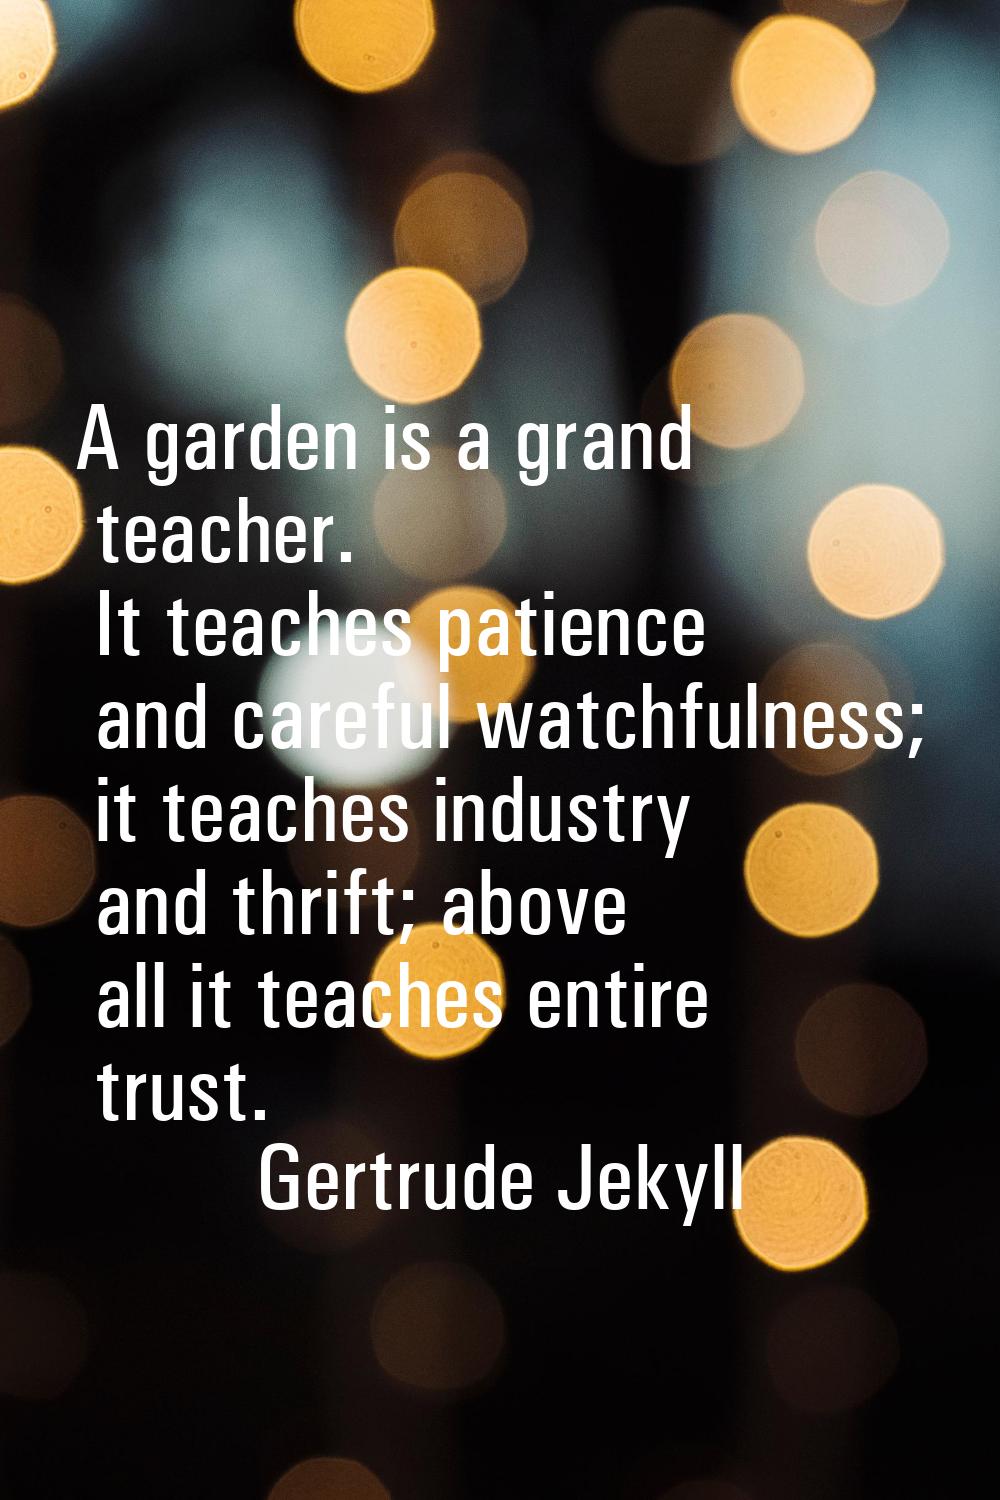 A garden is a grand teacher. It teaches patience and careful watchfulness; it teaches industry and 